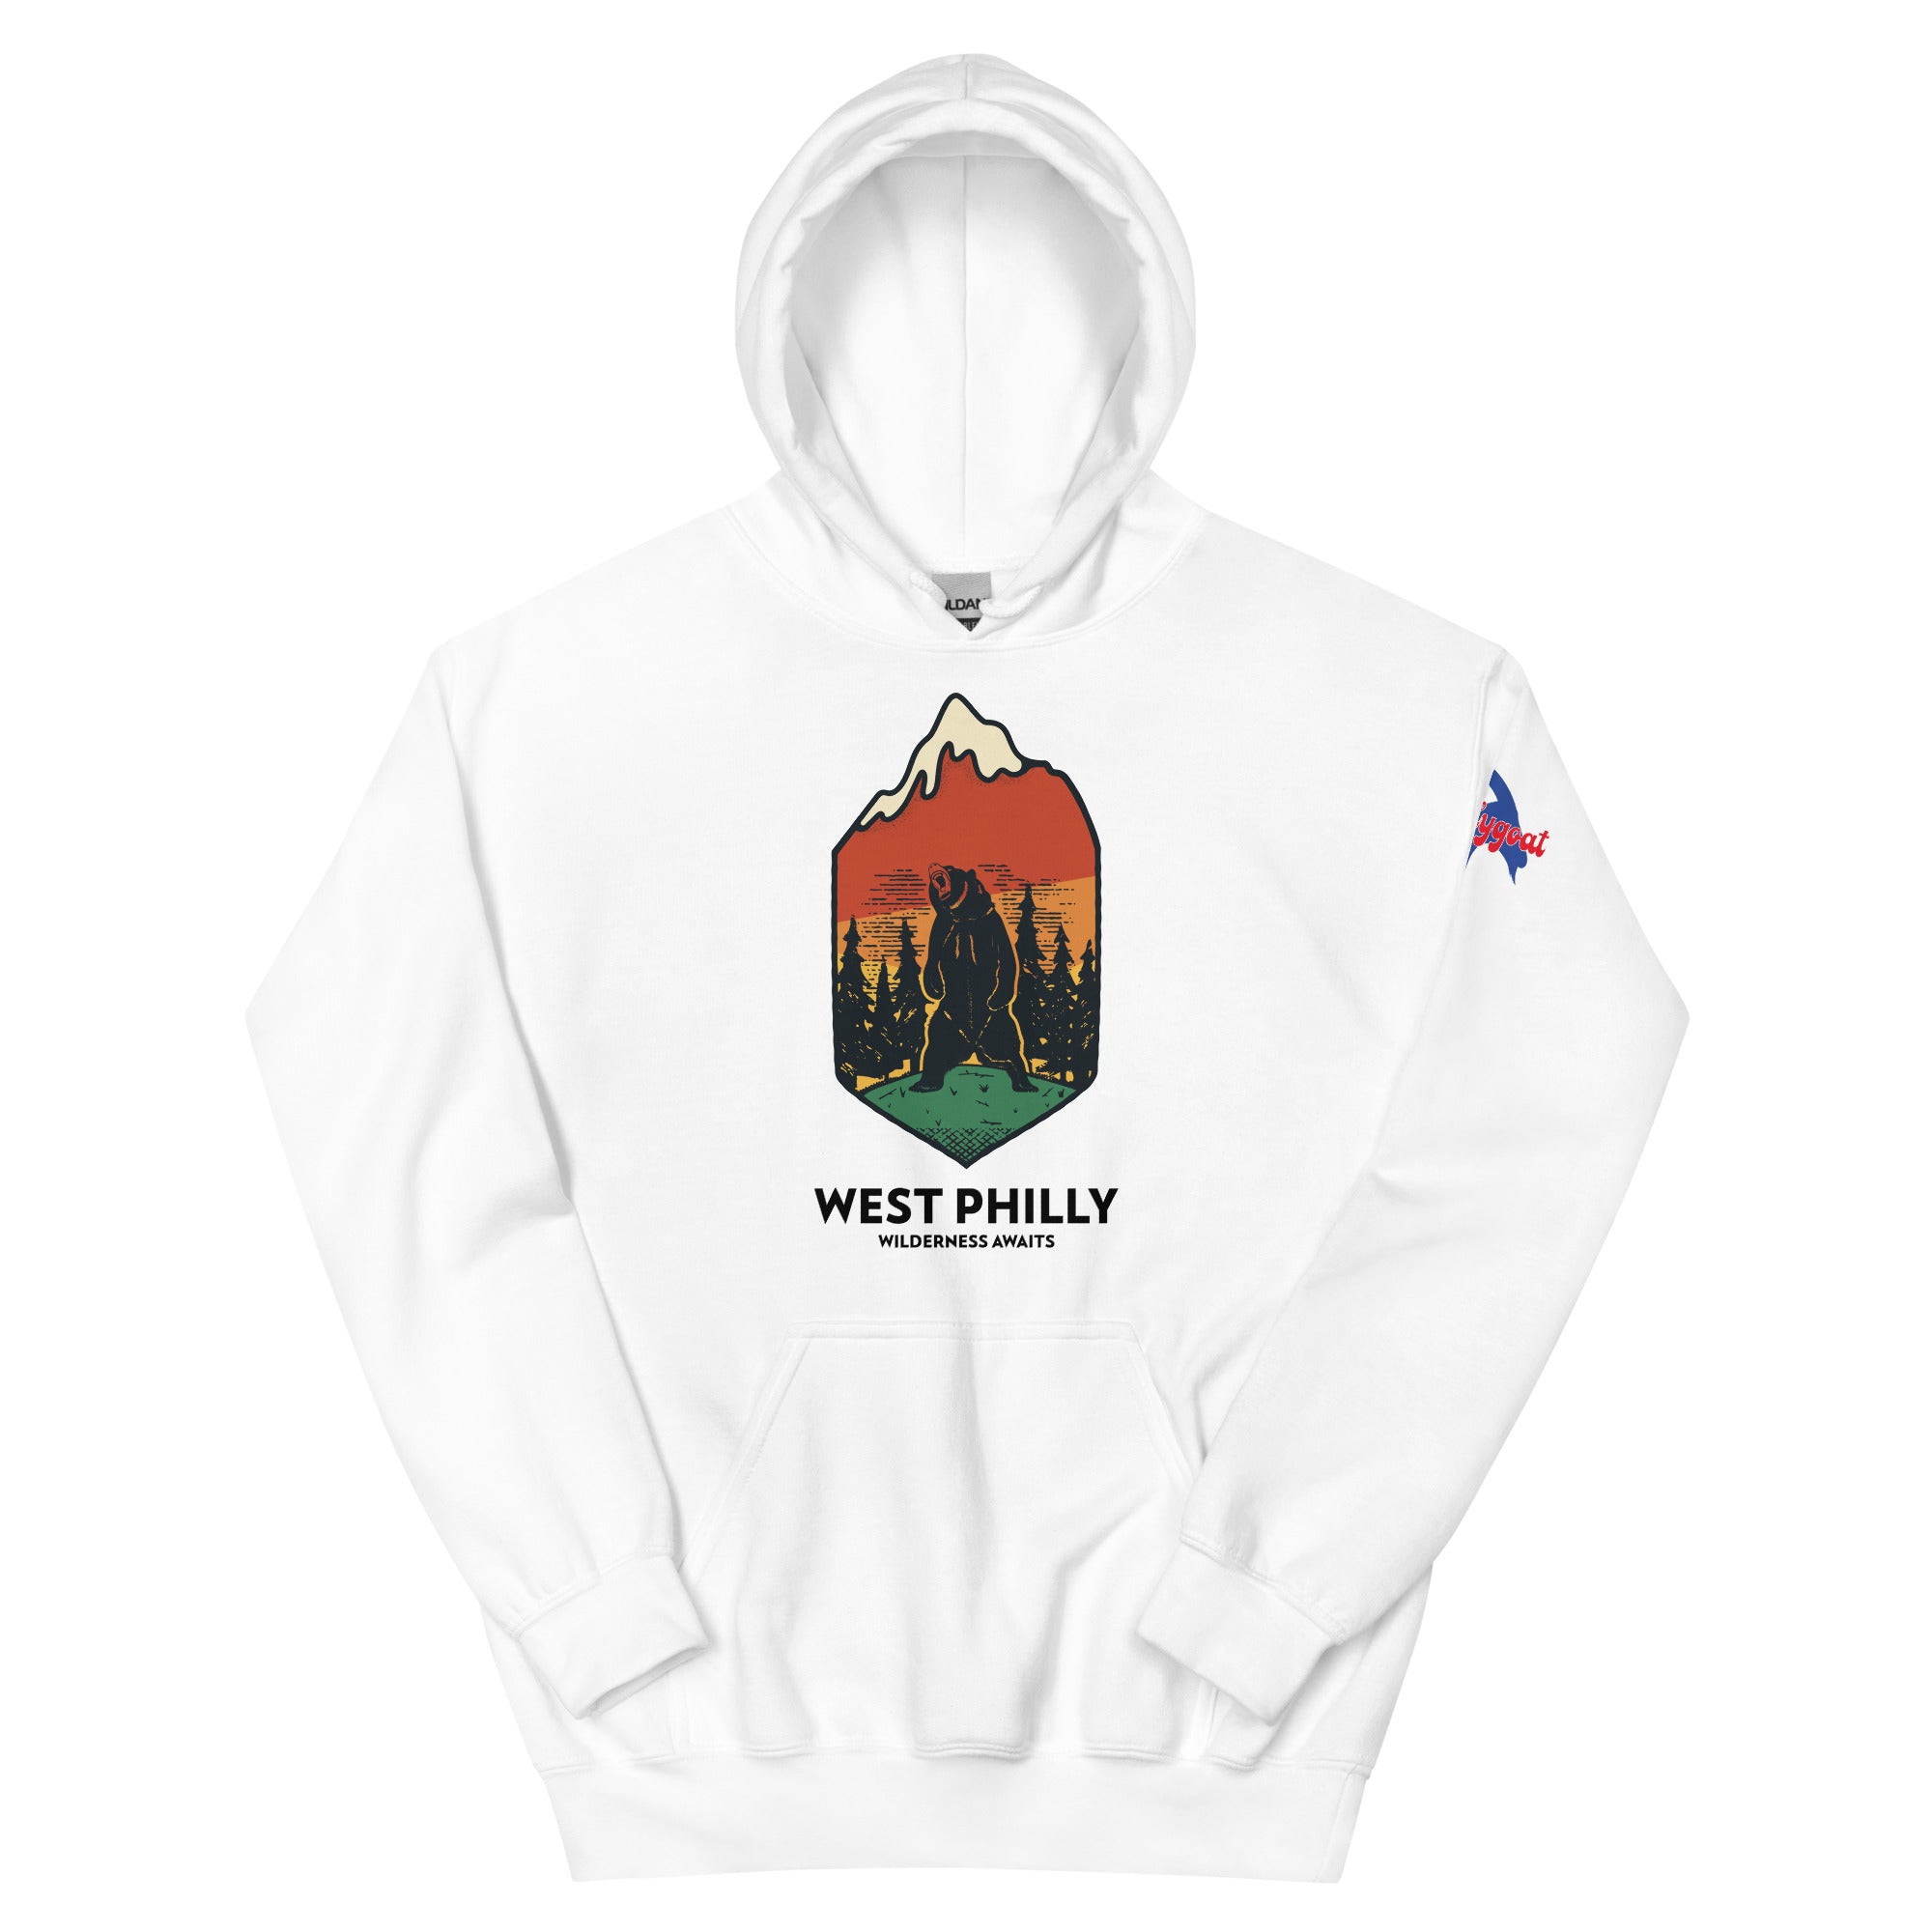 West Philly Philadelphia outdoors wilderness white hoodie Phillygoat